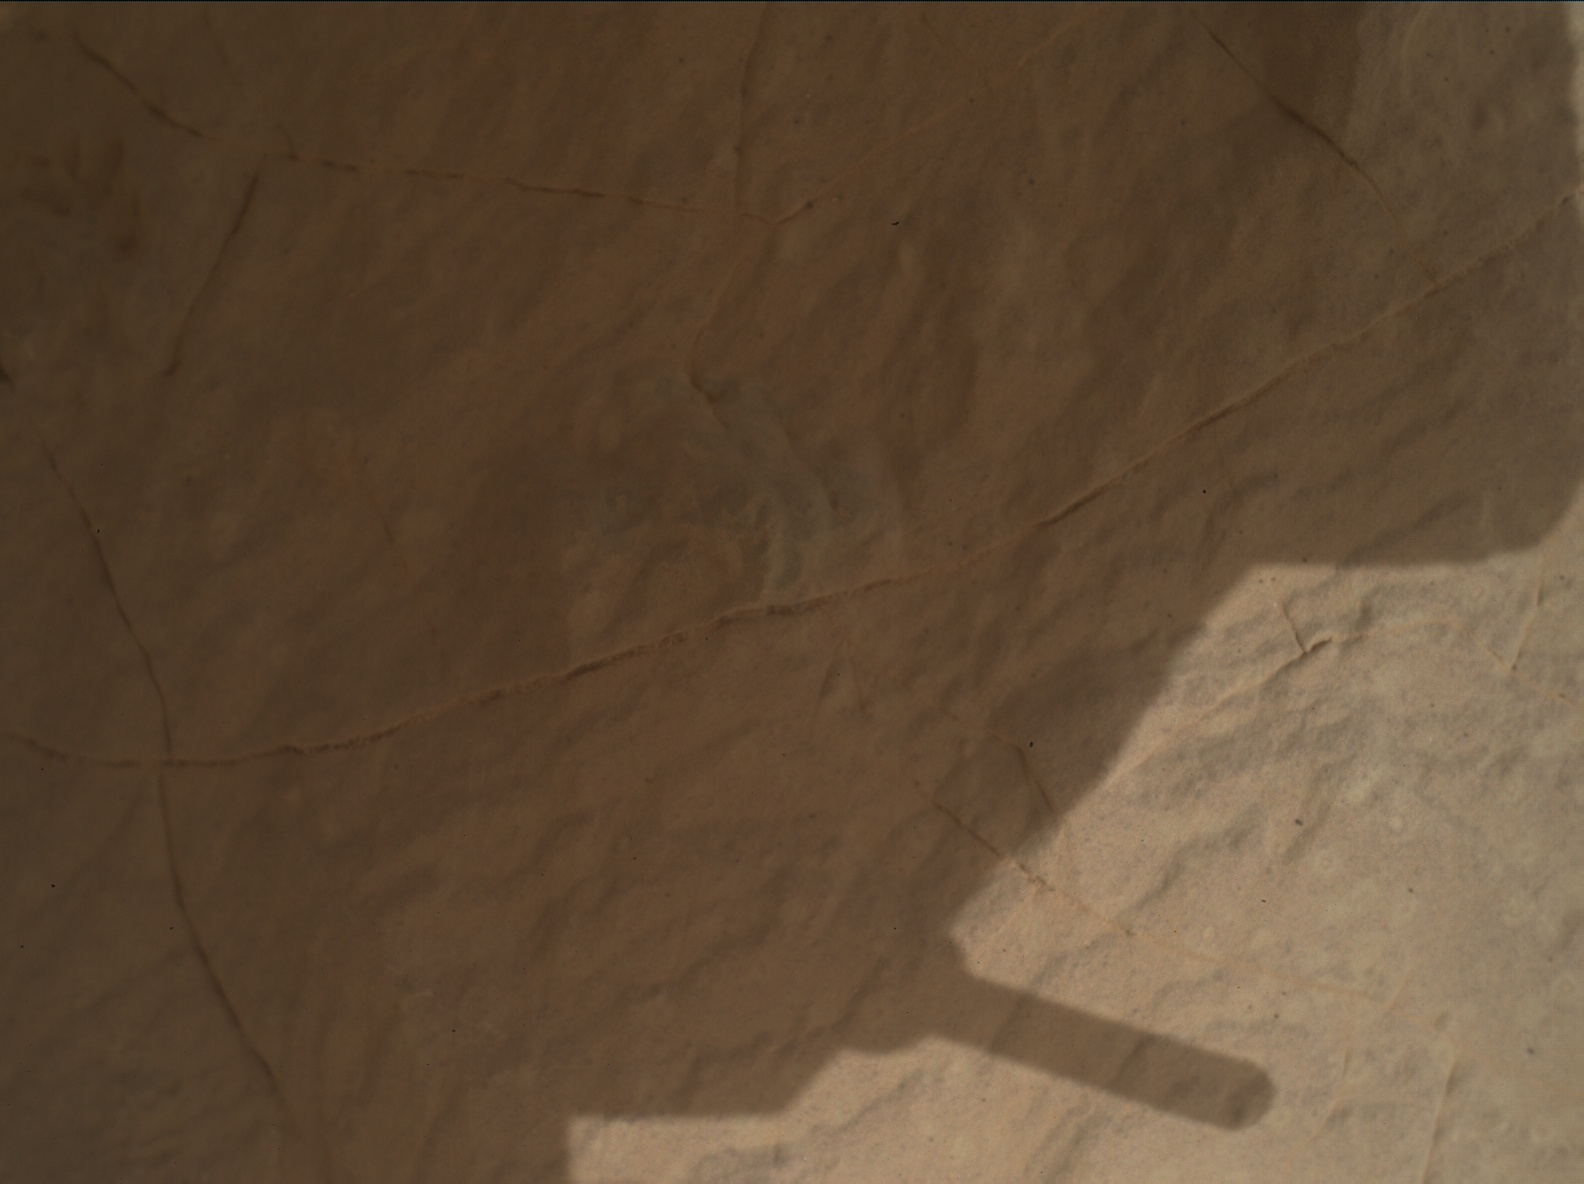 Nasa's Mars rover Curiosity acquired this image using its Mars Hand Lens Imager (MAHLI) on Sol 3015